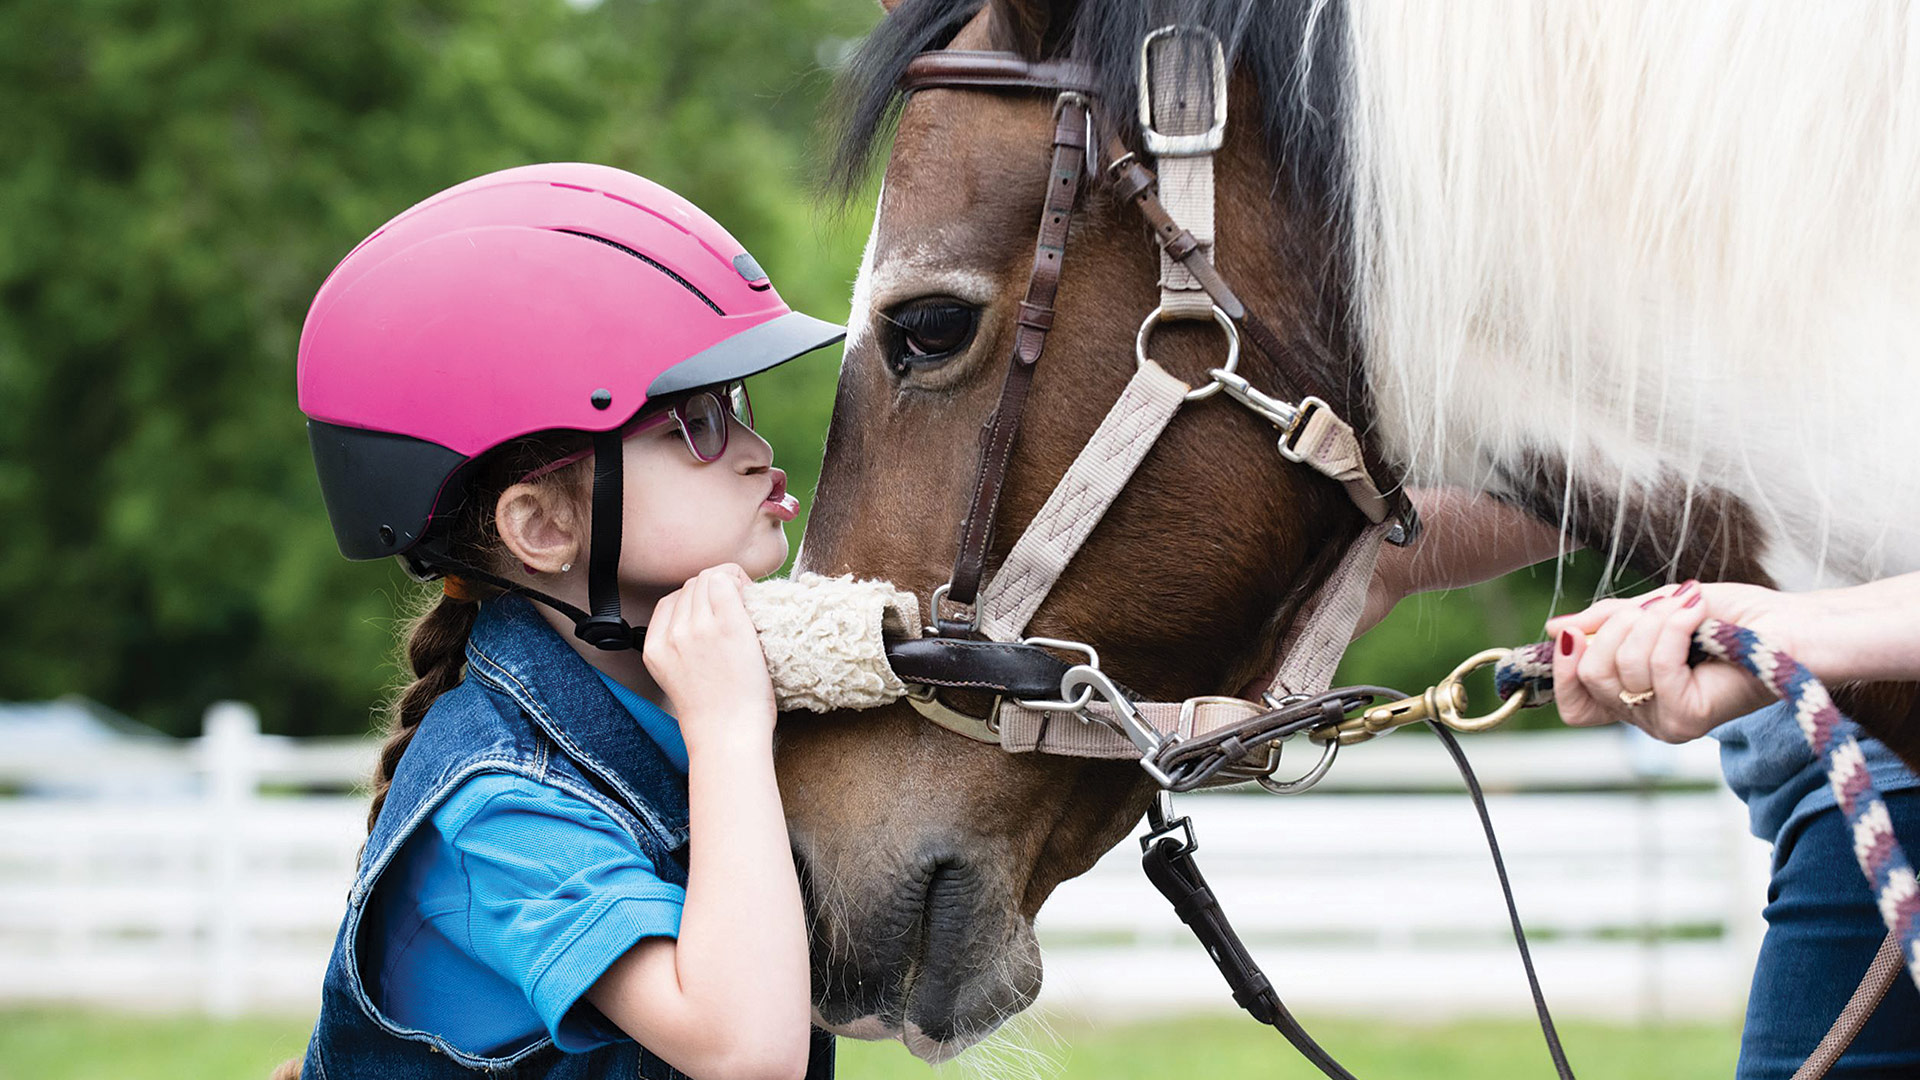 Emma Boyer-Martinez, a 7-year-old from Holyoke who lives with disabilities that make some activities more difficult for her, but loves horses and riding and takes part in therapeutic lessons that help her build strength and balance